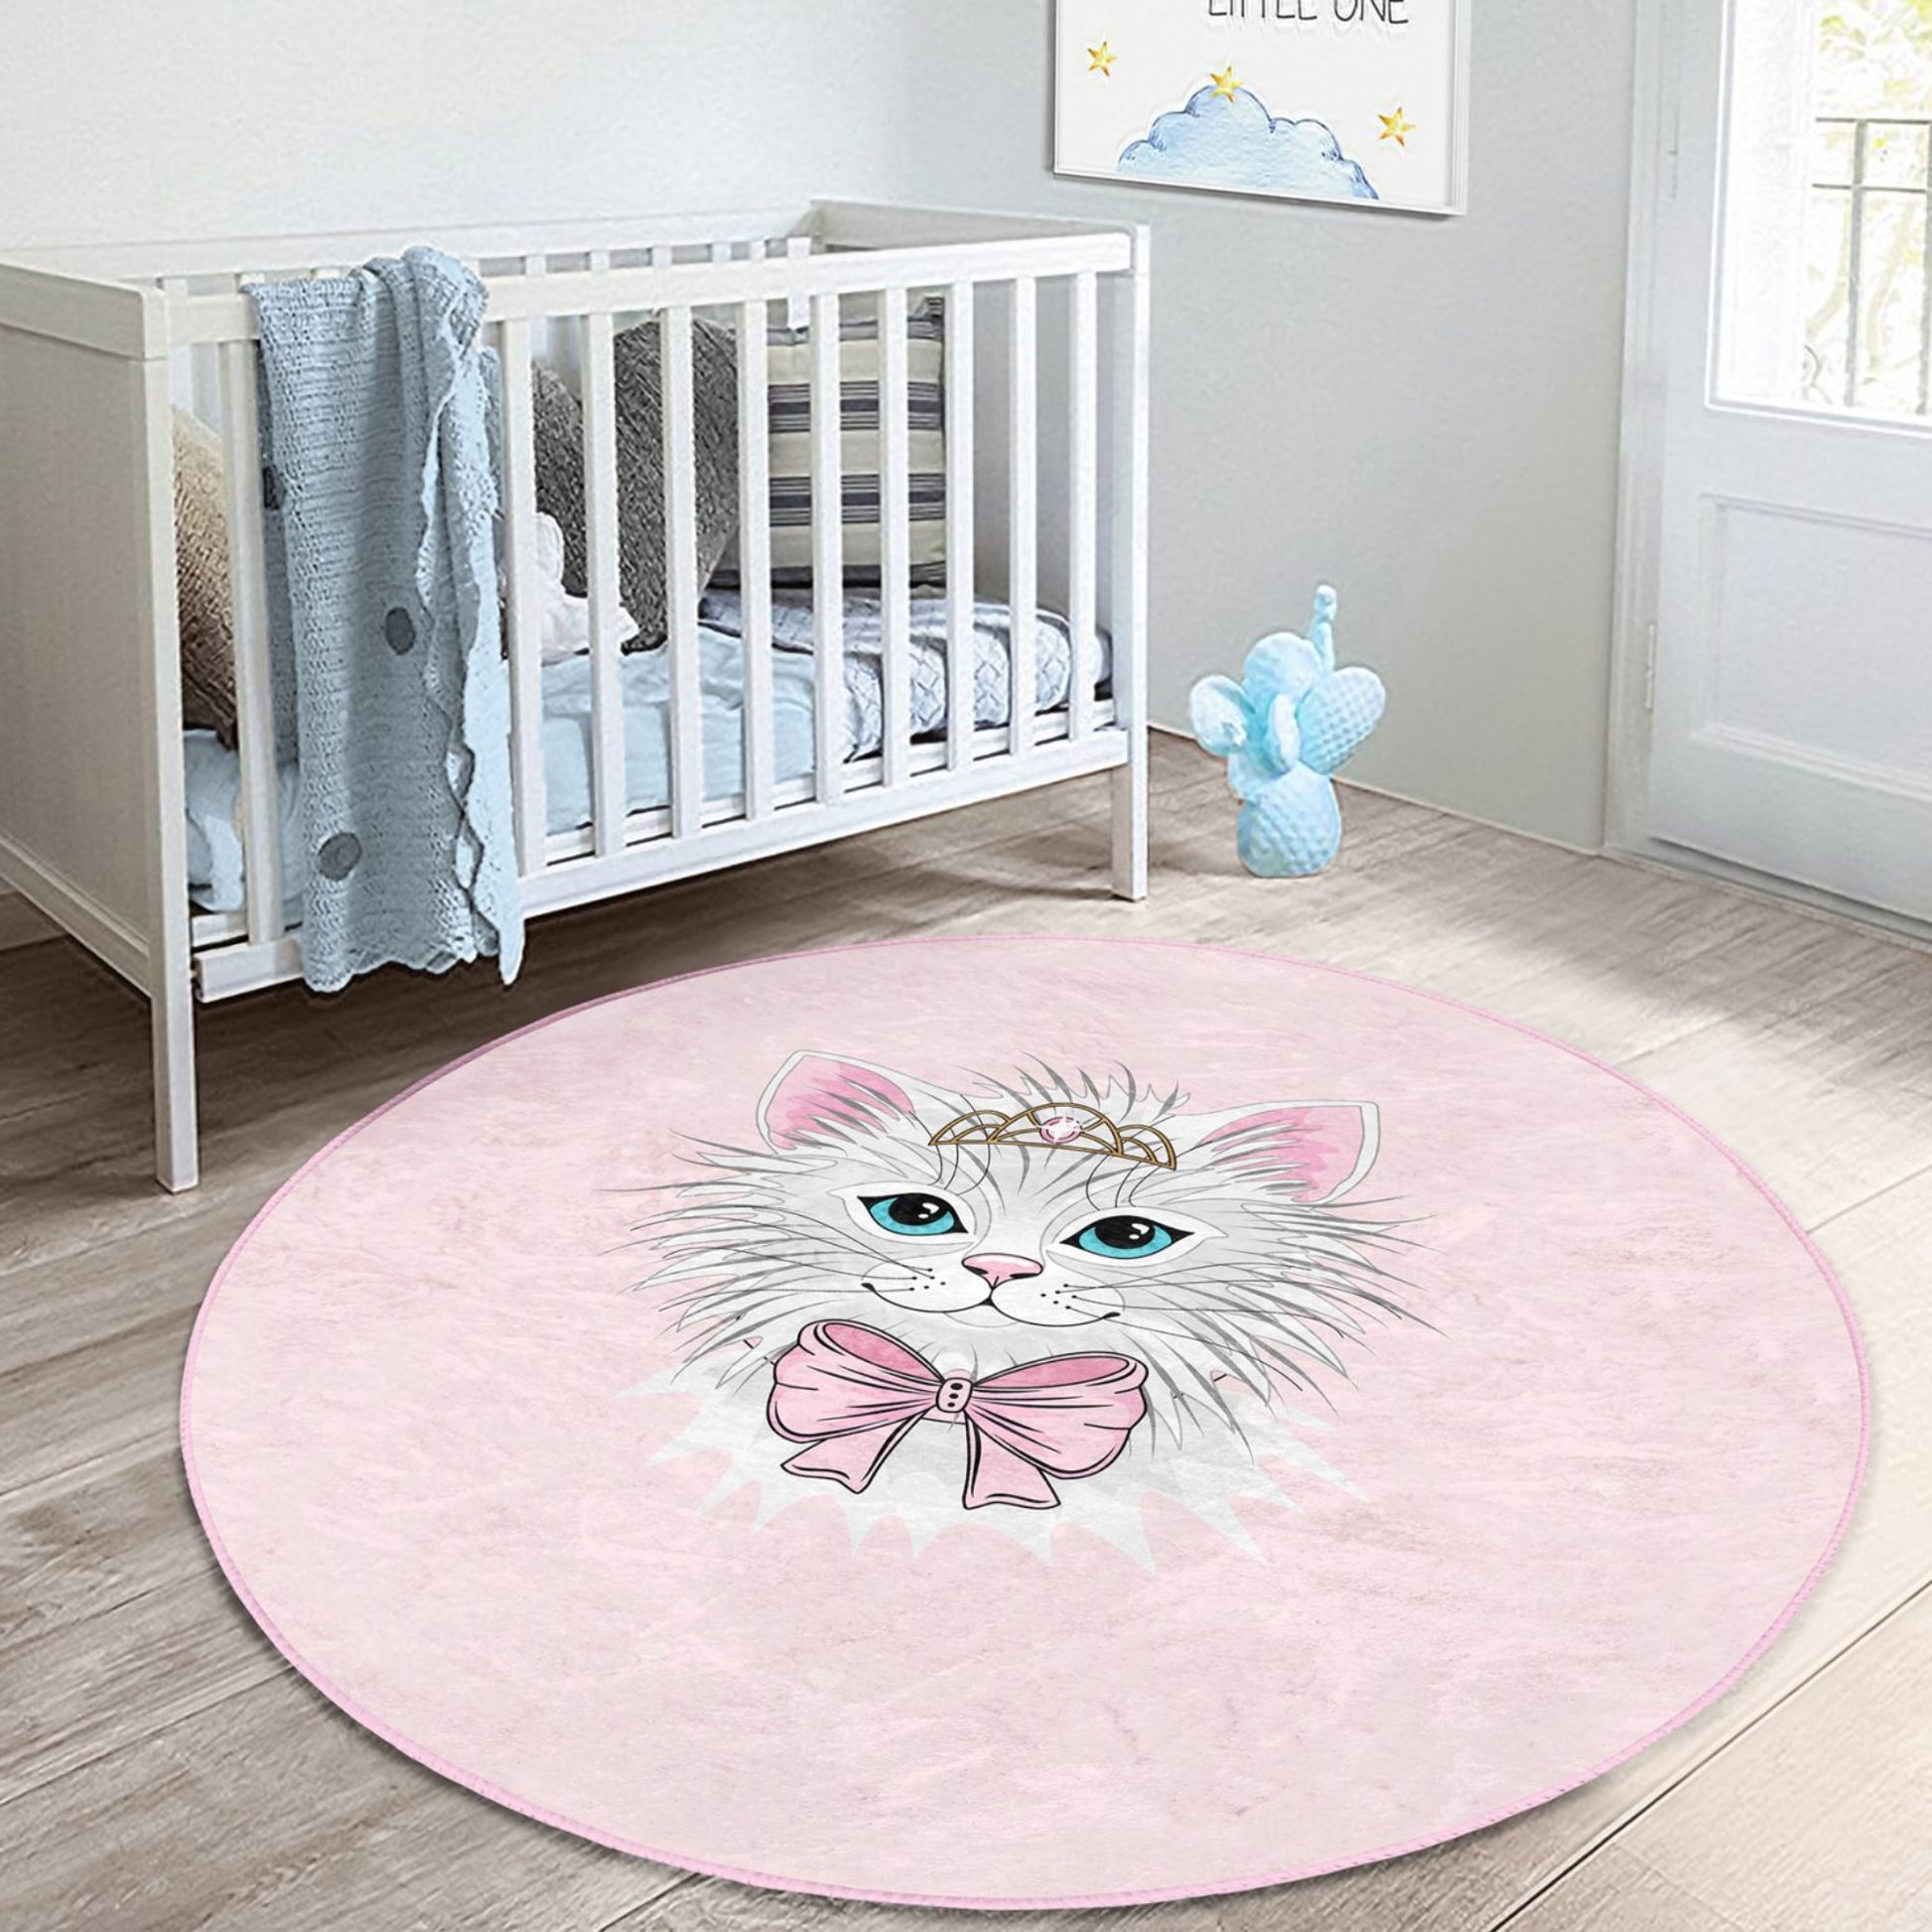 Rug with Playful Cat Illustrations